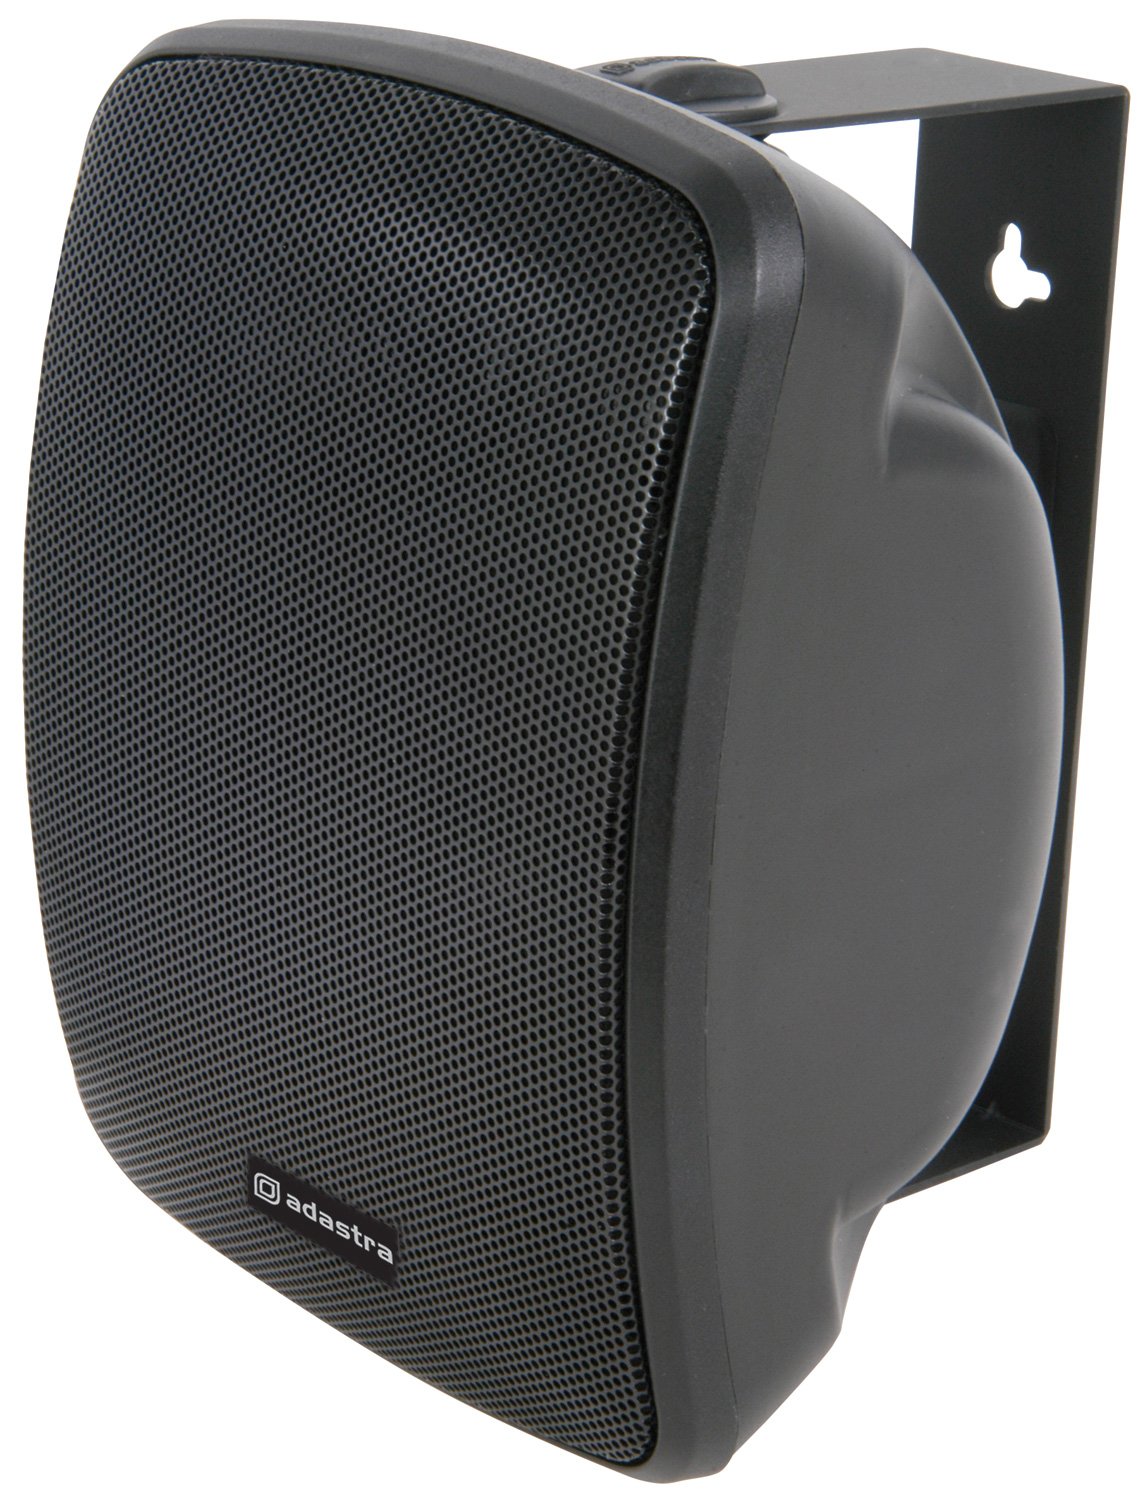 FC Series Compact Background Speakers FC4V-B compact 100V background speaker 3.5in, black